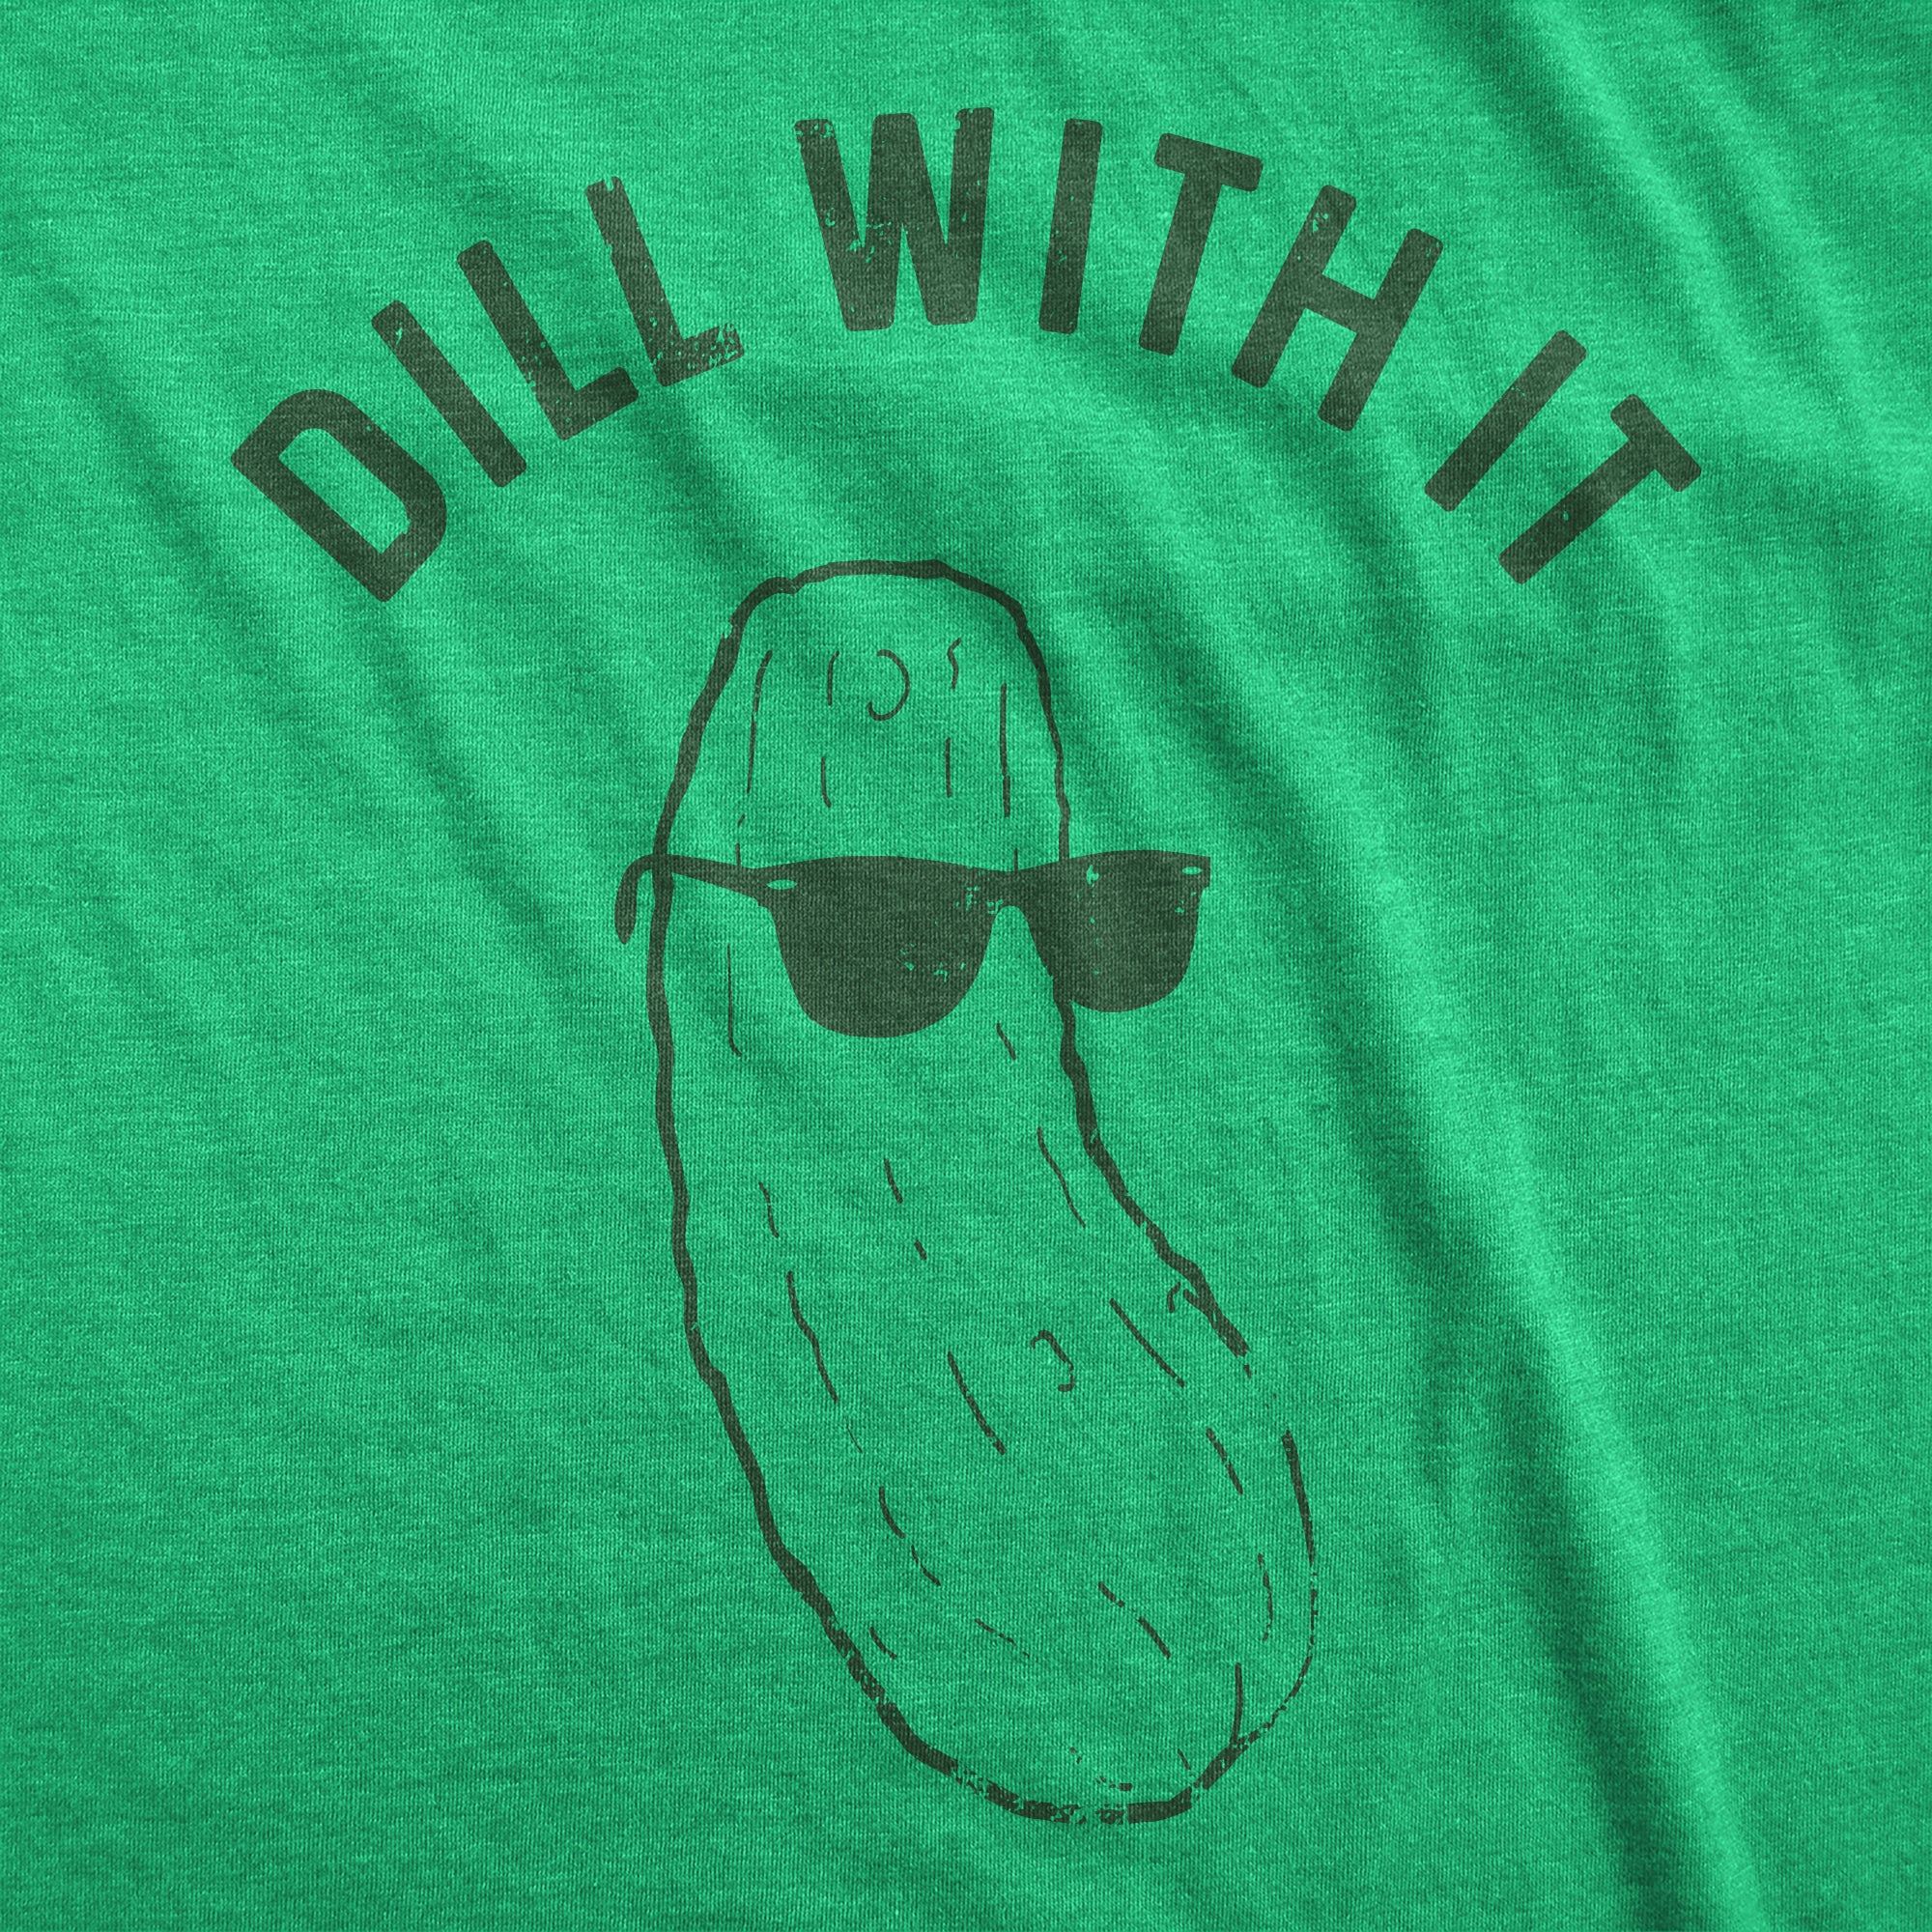 Funny Dill With It Womens T Shirt Nerdy Food Tee